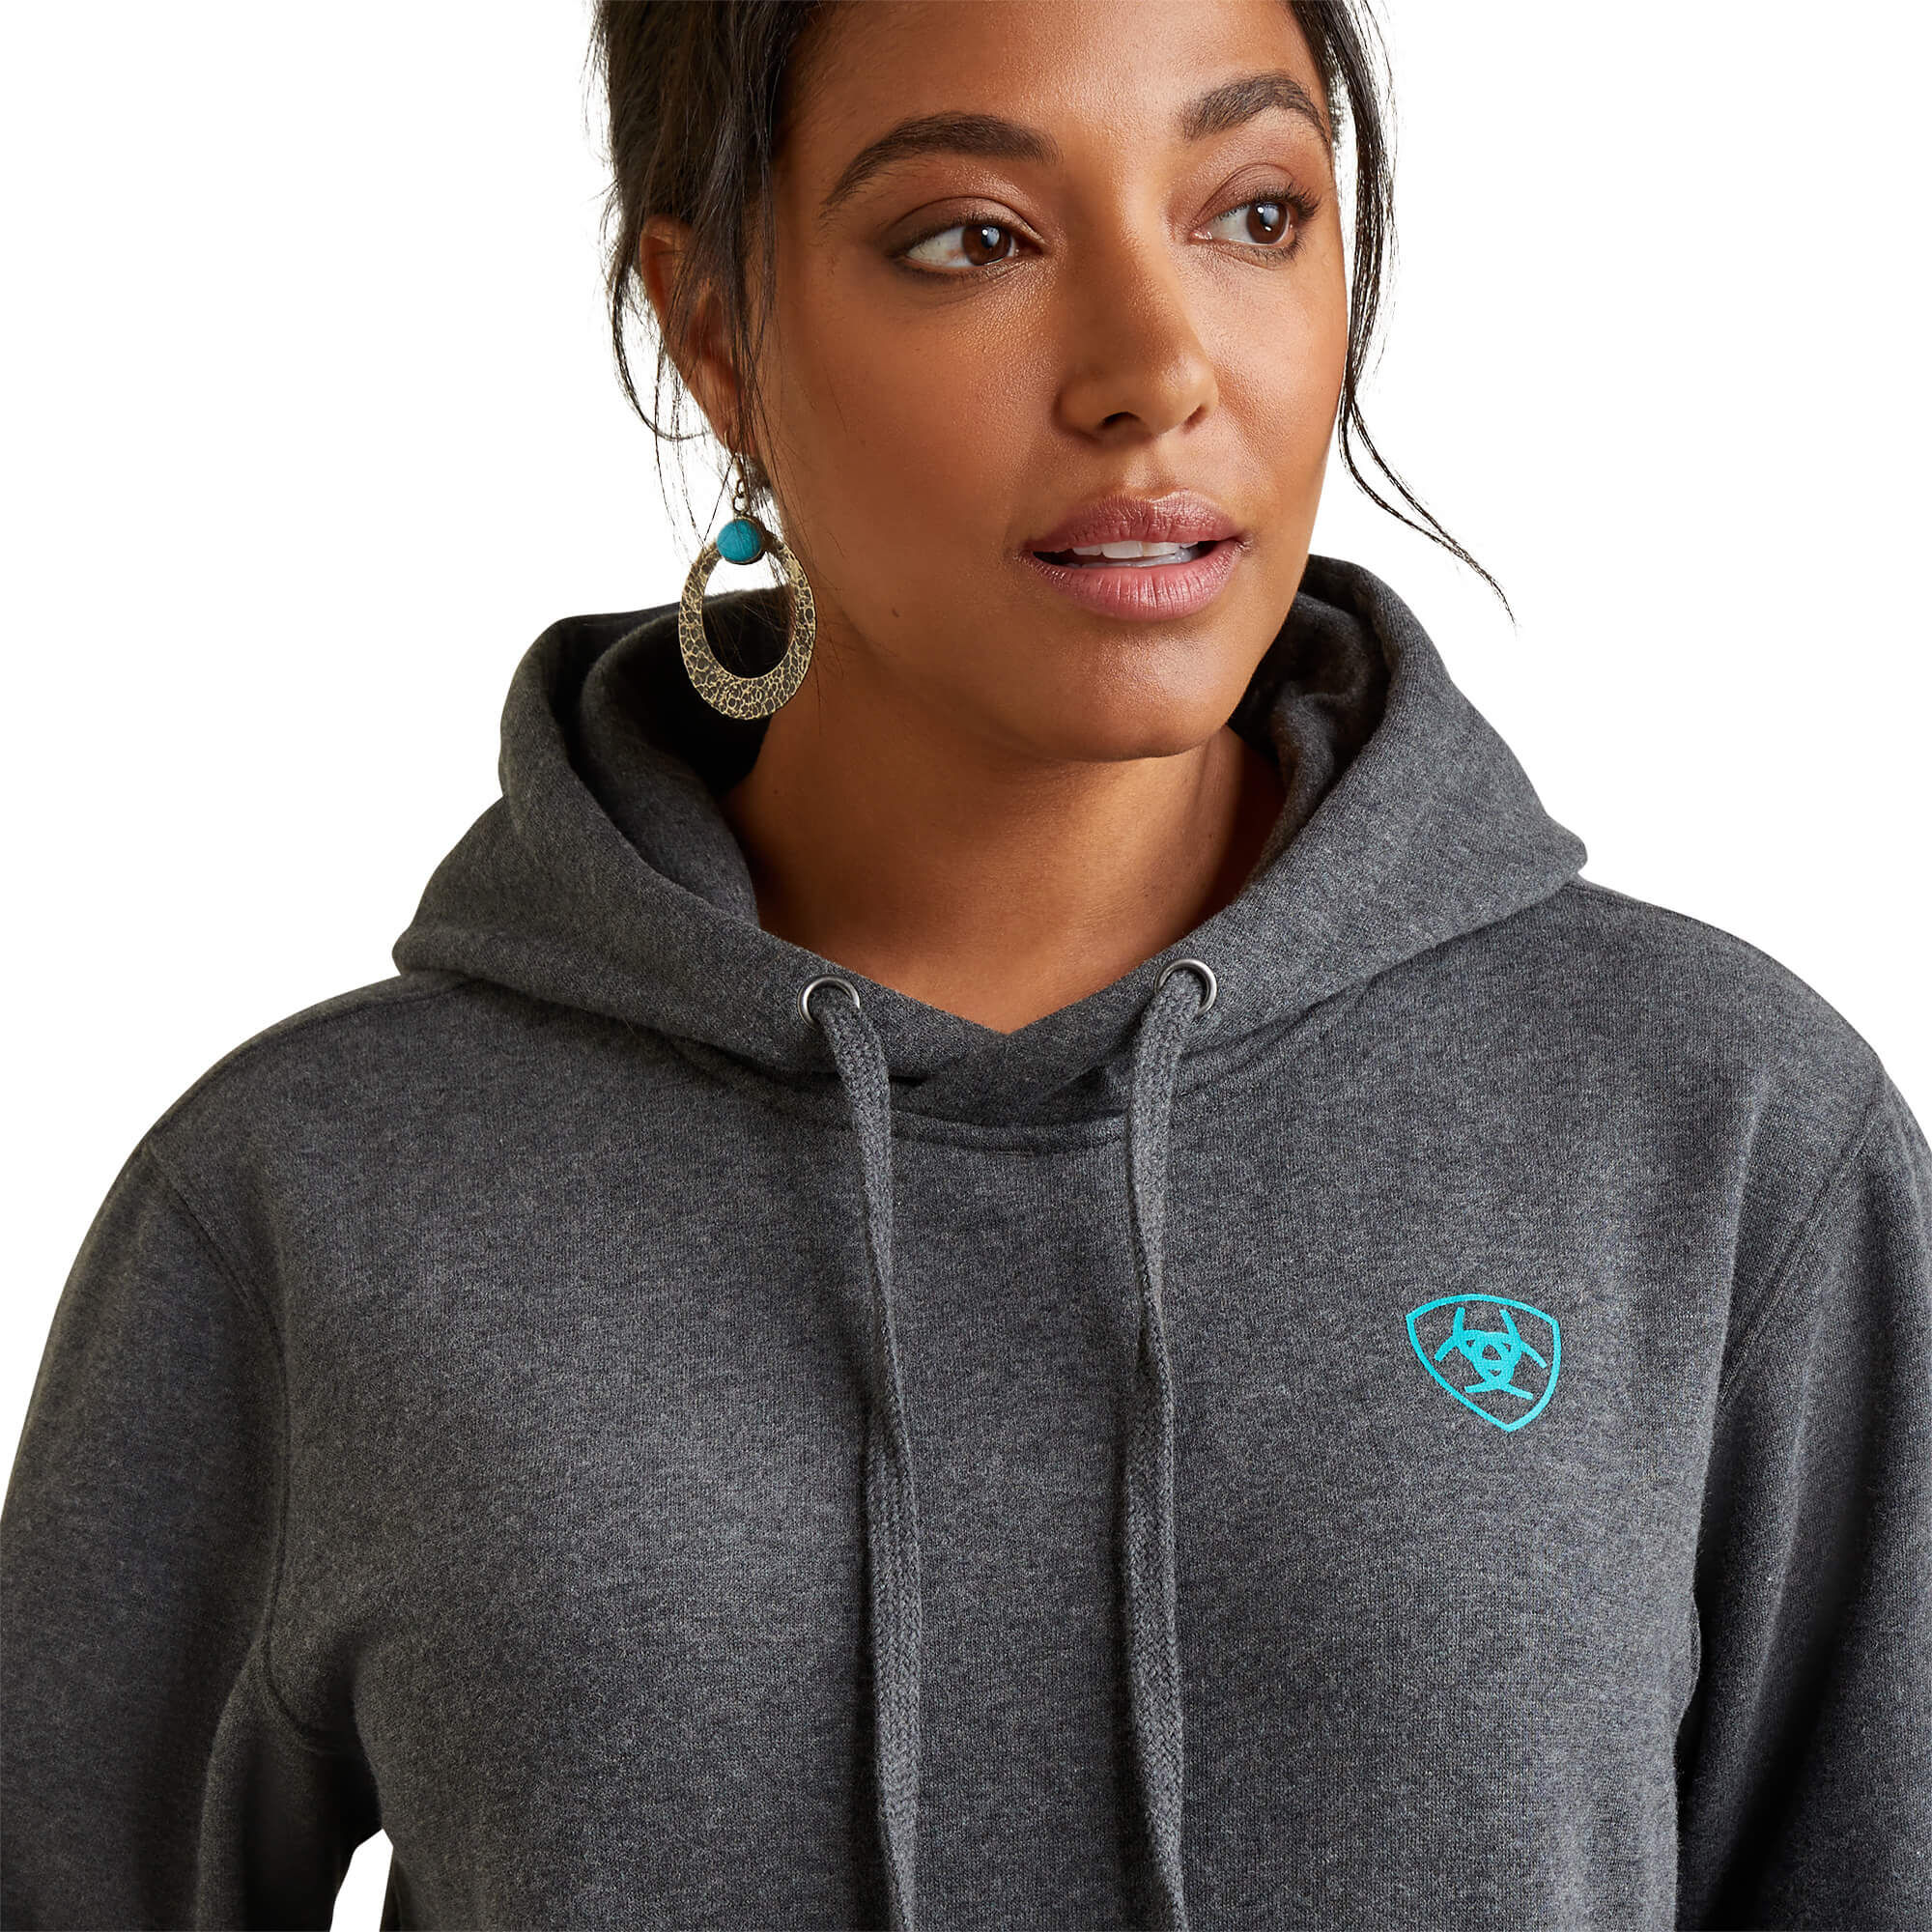 Women's Logo Hoodie in Charcoal Heather, Size: Medium by Ariat